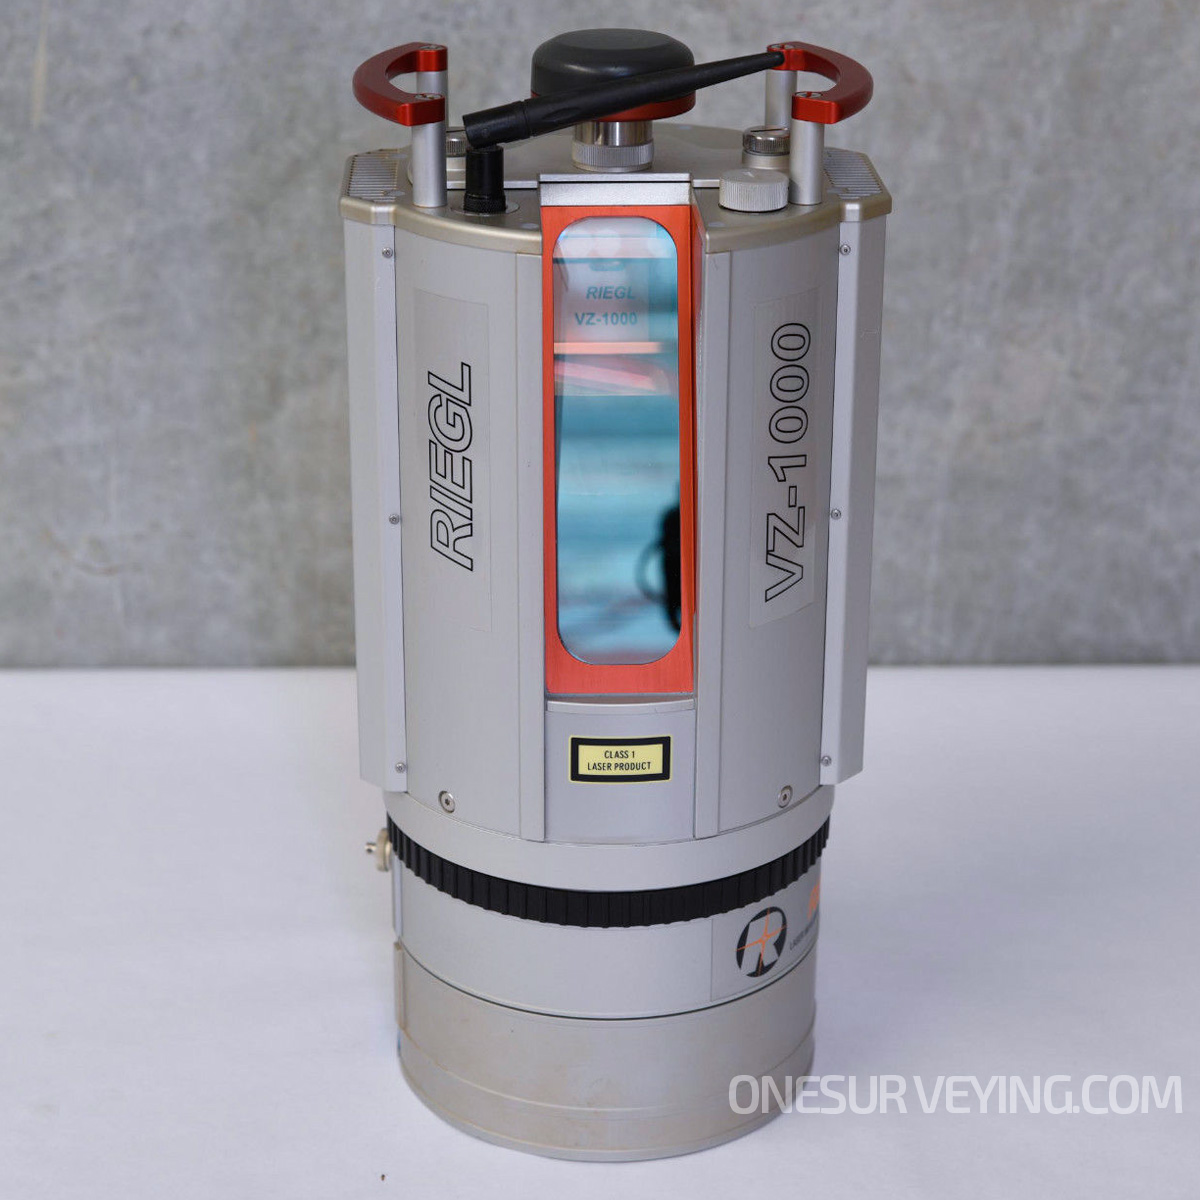 Used-Riegl-VZ-1000-for-sale.jpg